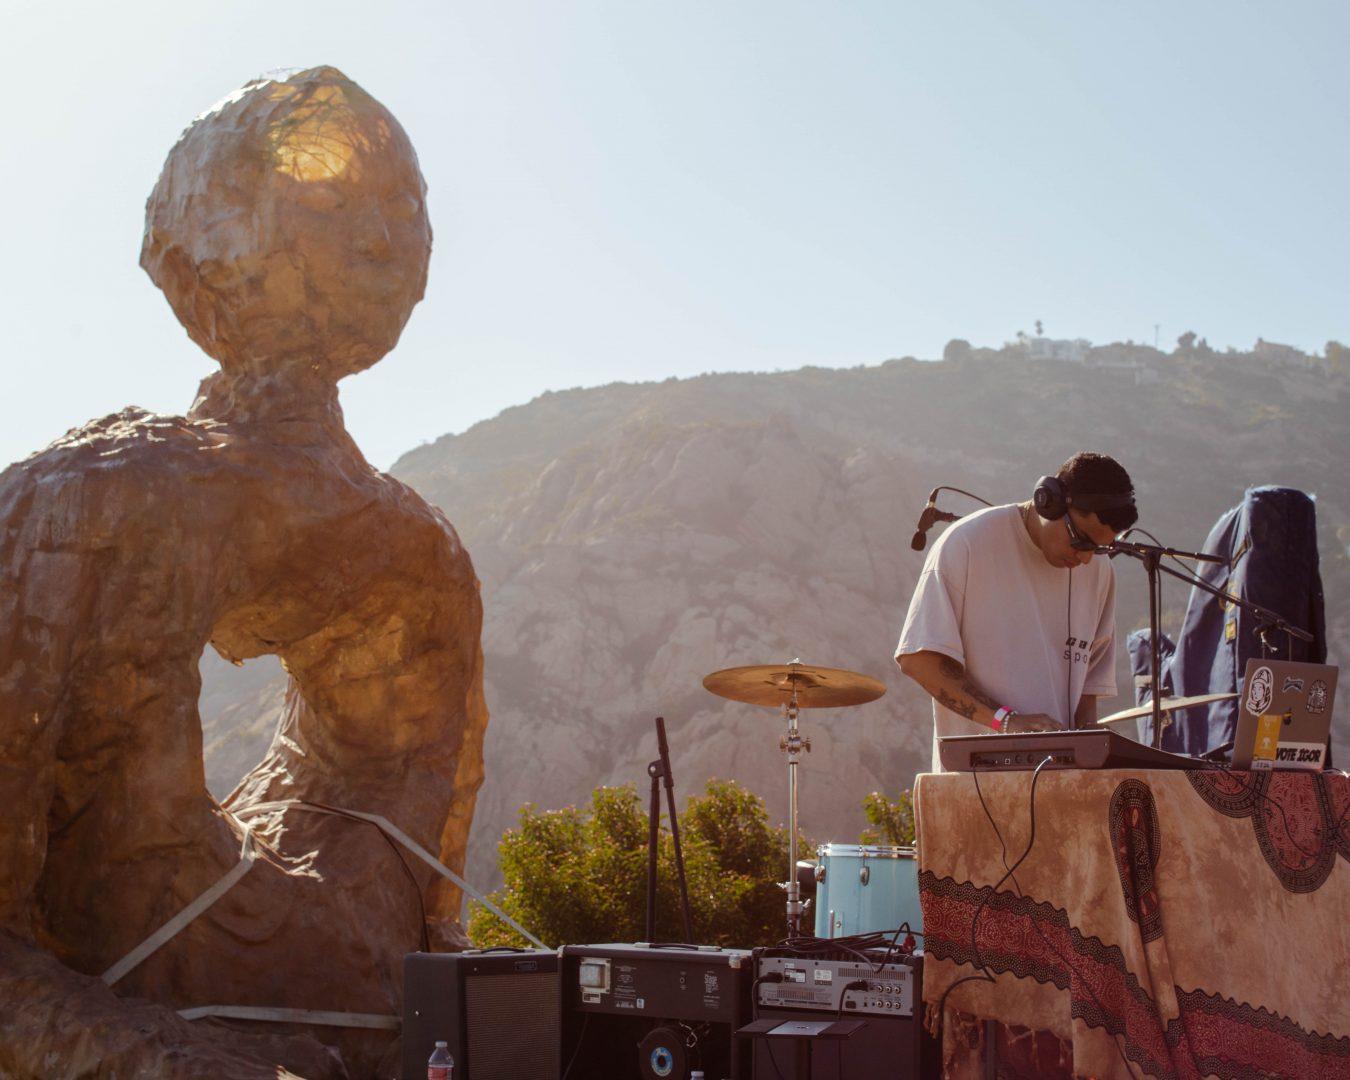 Jacob Rivera, who also goes by the stage name Pilotkid, performing a DJ set on top of a mountain at Malibu in May earlier this year. (Photo courtesy of Jacob Rivera)